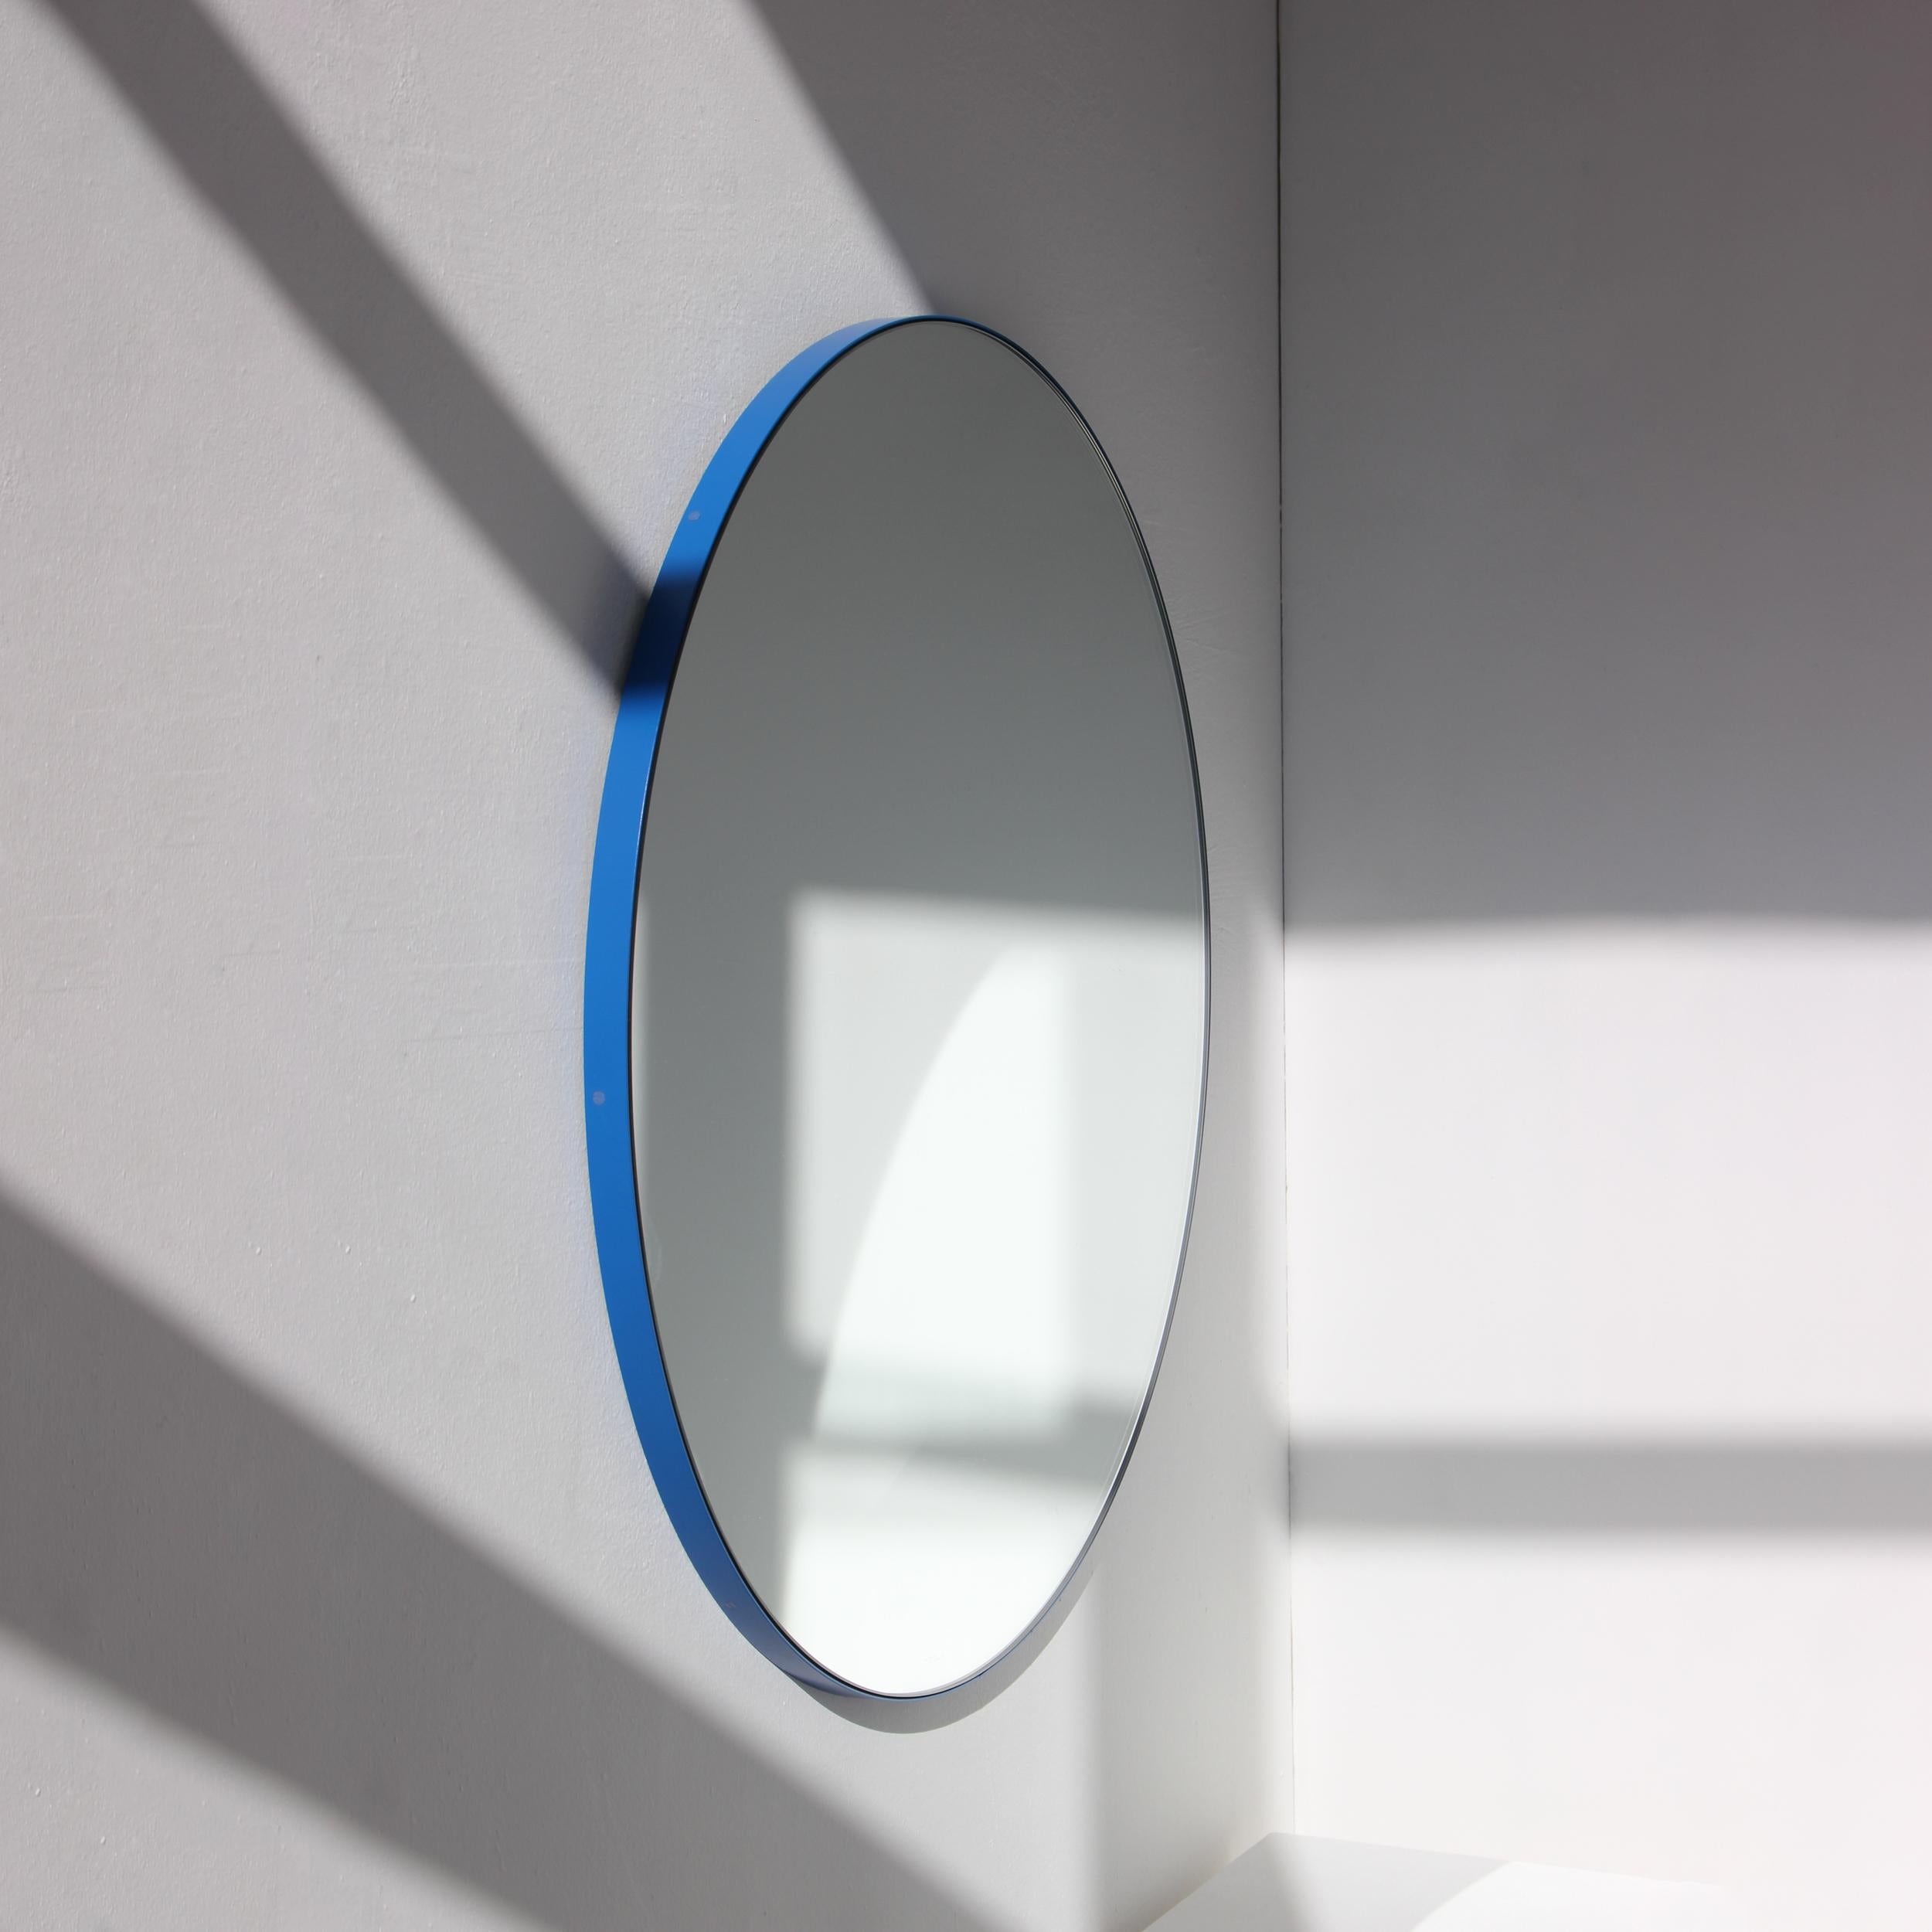 Orbis Round Modern Mirror with Blue Frame, Large In New Condition For Sale In London, GB